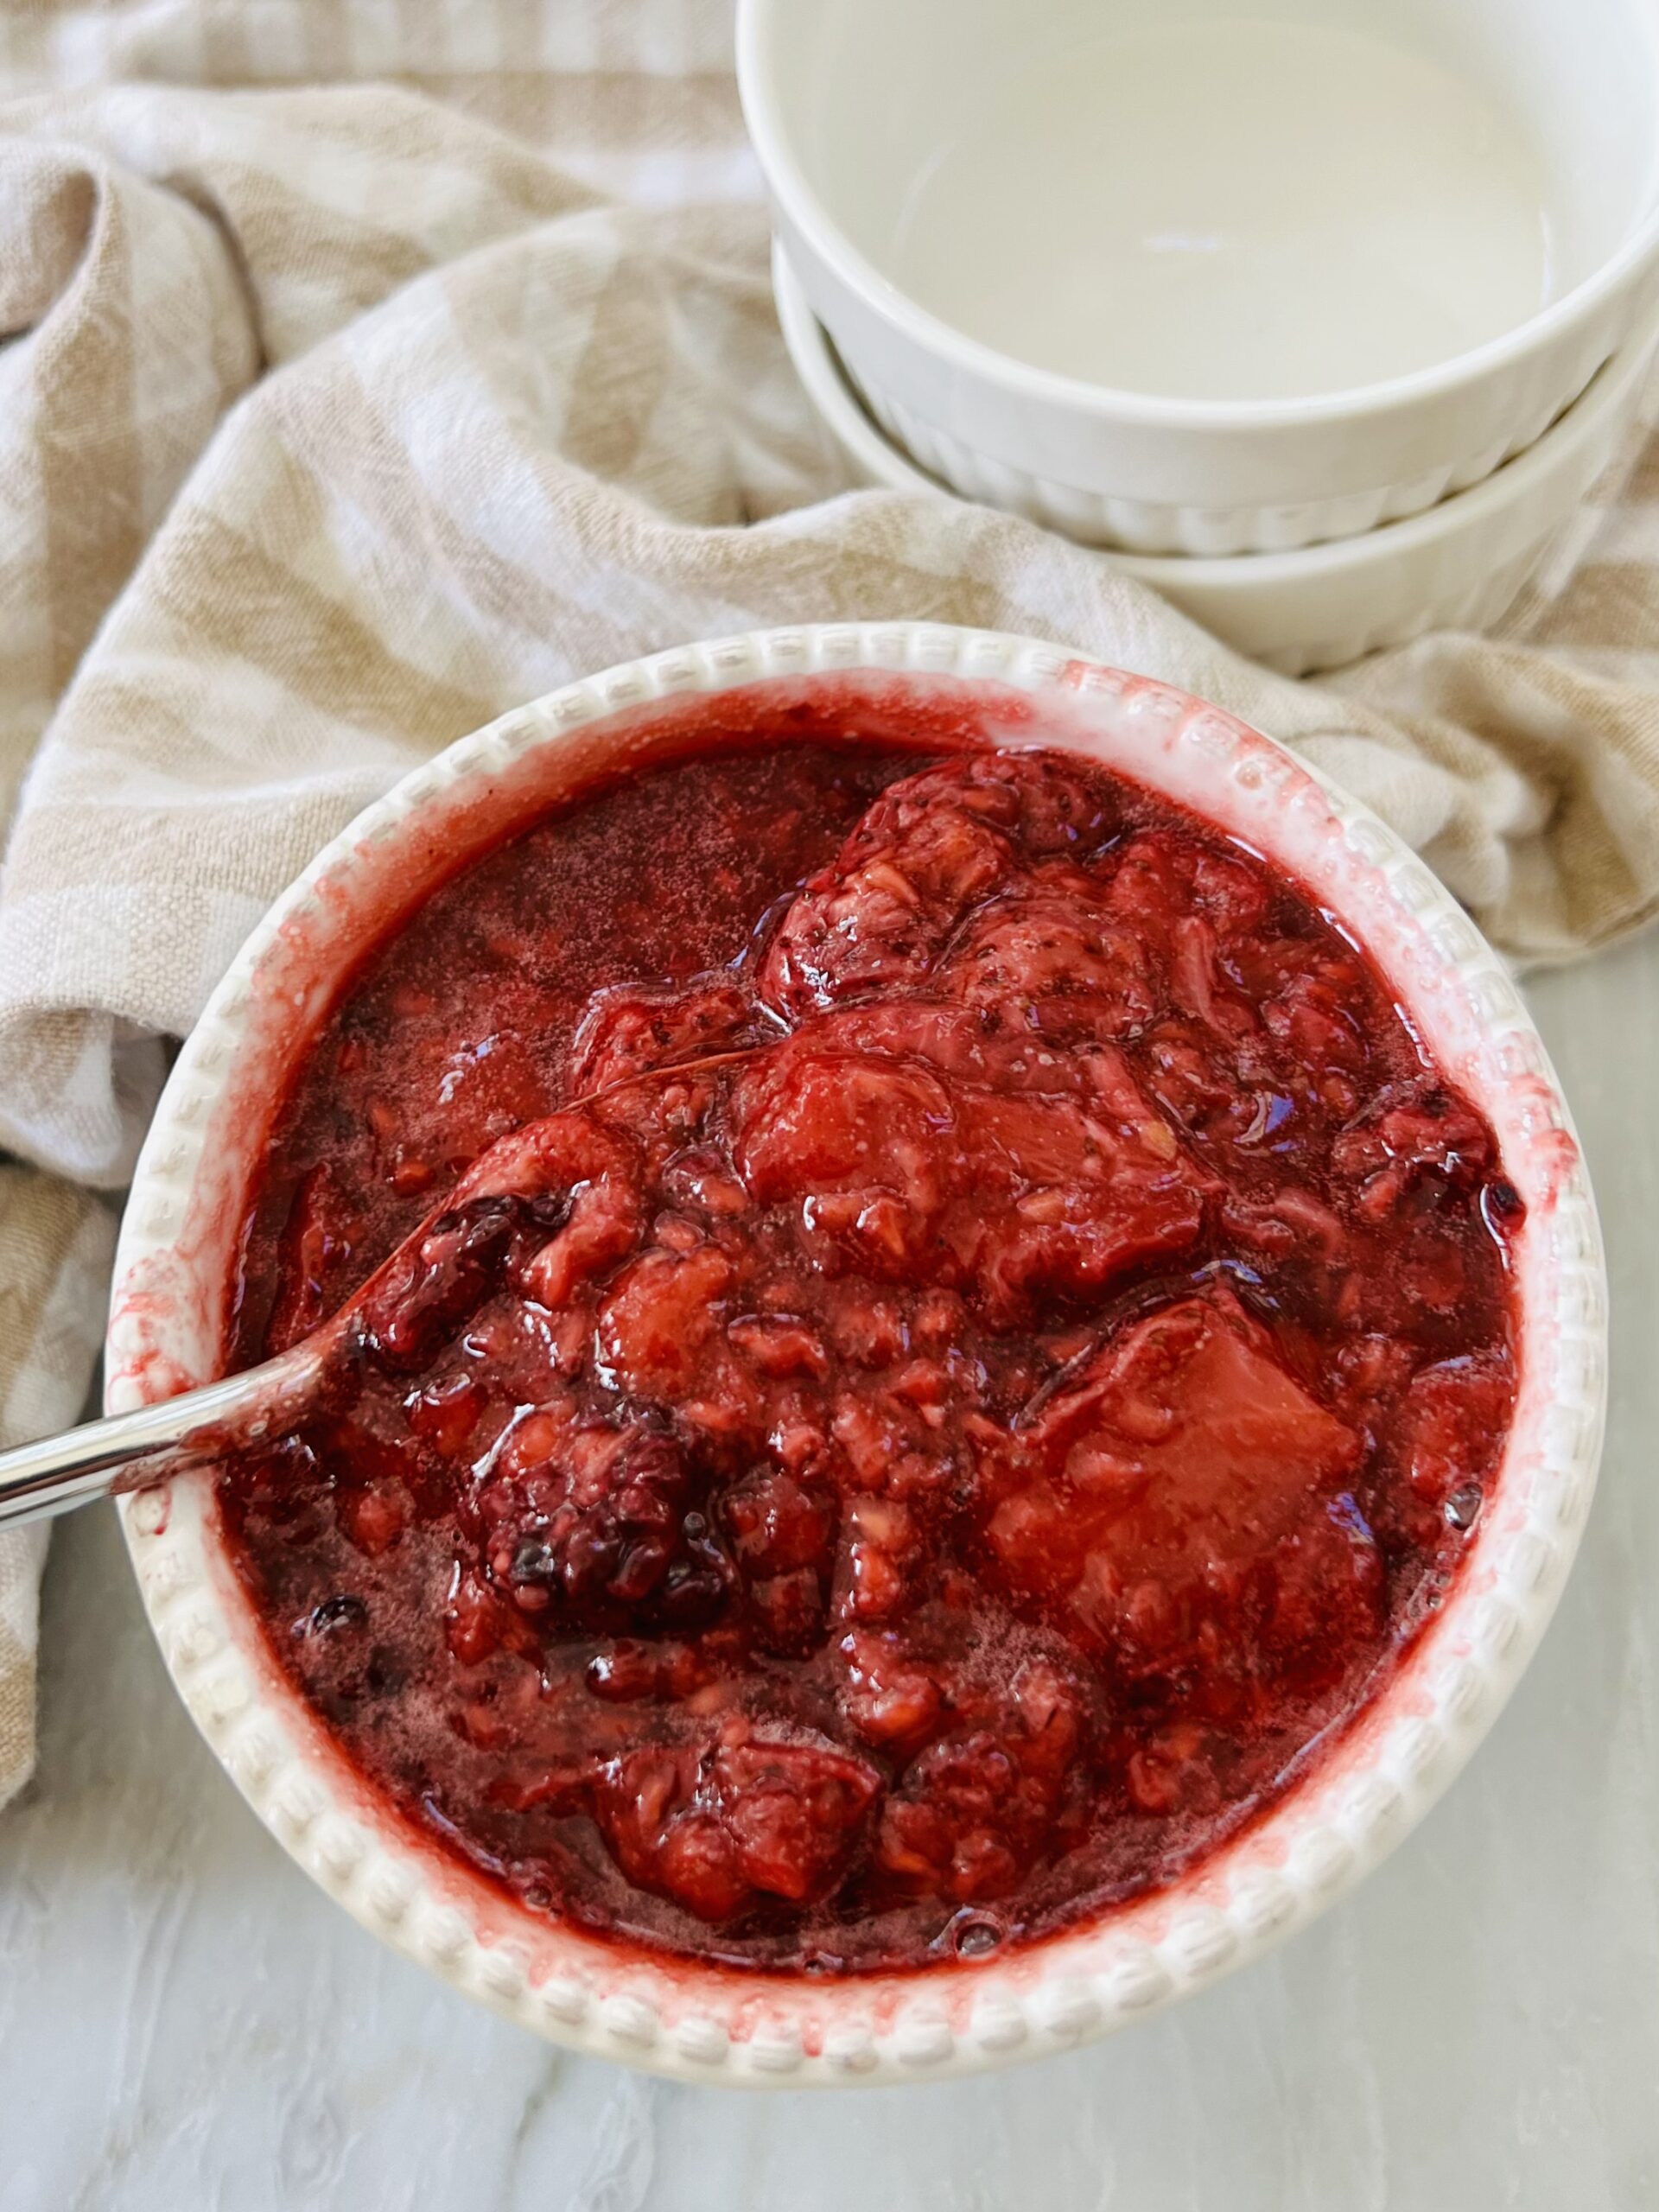 Leftover Berry Compote